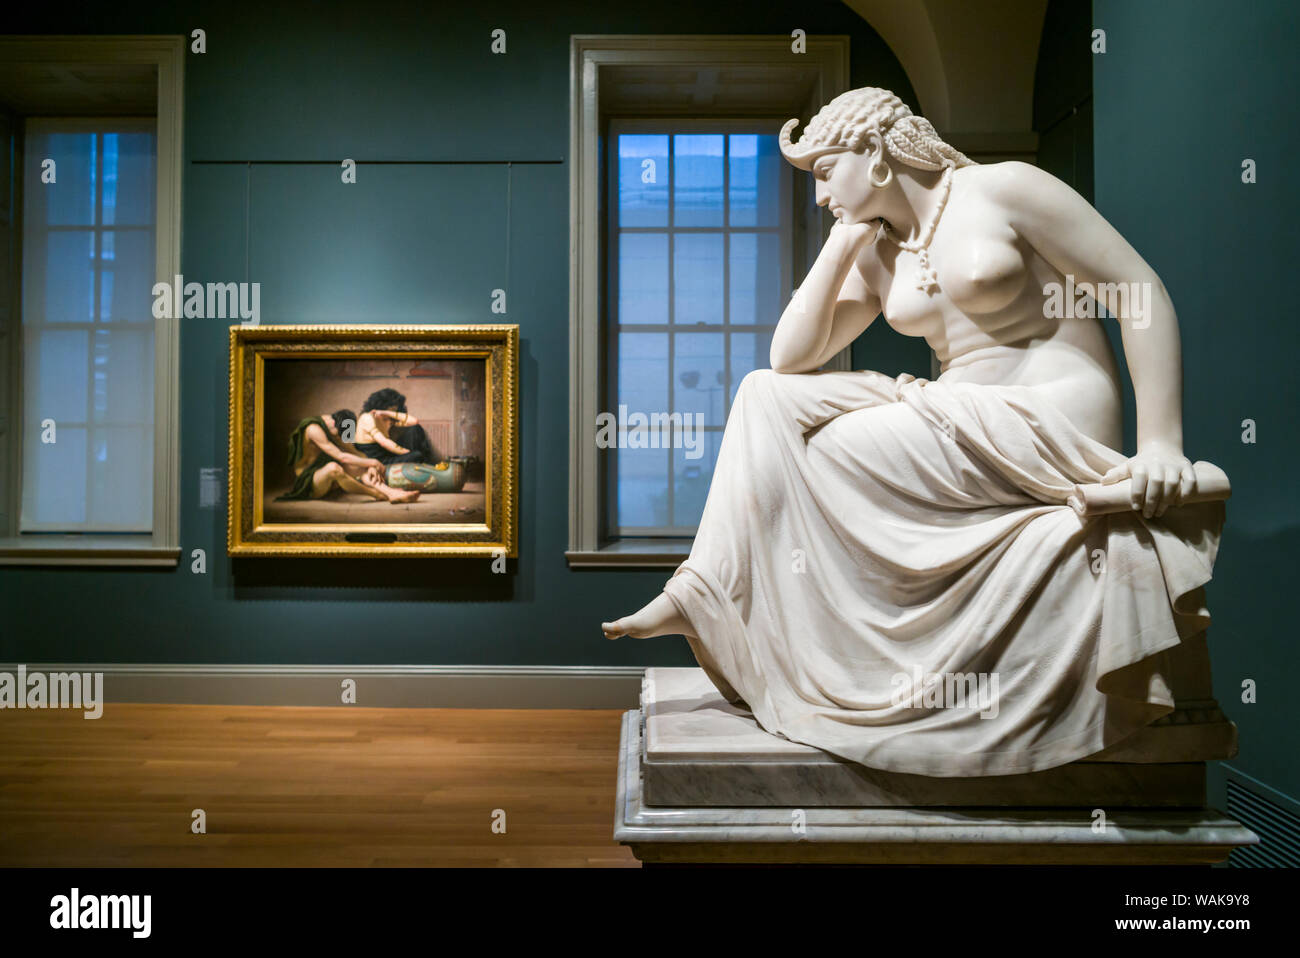 USA, Washington D.C. Reynolds Center for American Art, National Portrait Gallery, sculpture of The Libyan Sybil by William Wetmore Story (Editorial Use Only) Stock Photo